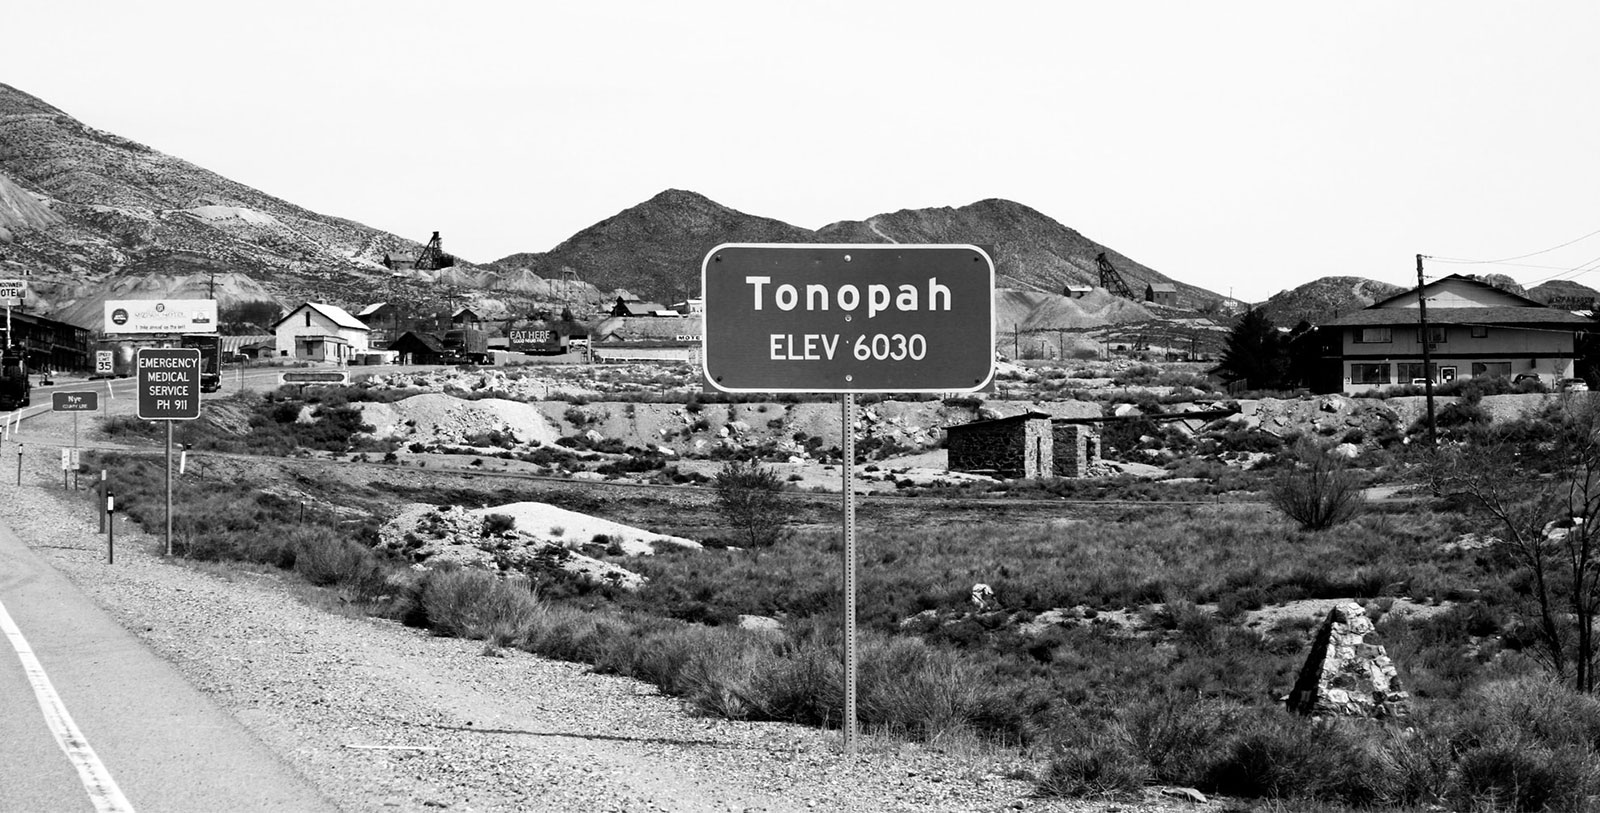 Explore the Tonopah Historic Mining Park and its historic buildings and underground mine tunnel.